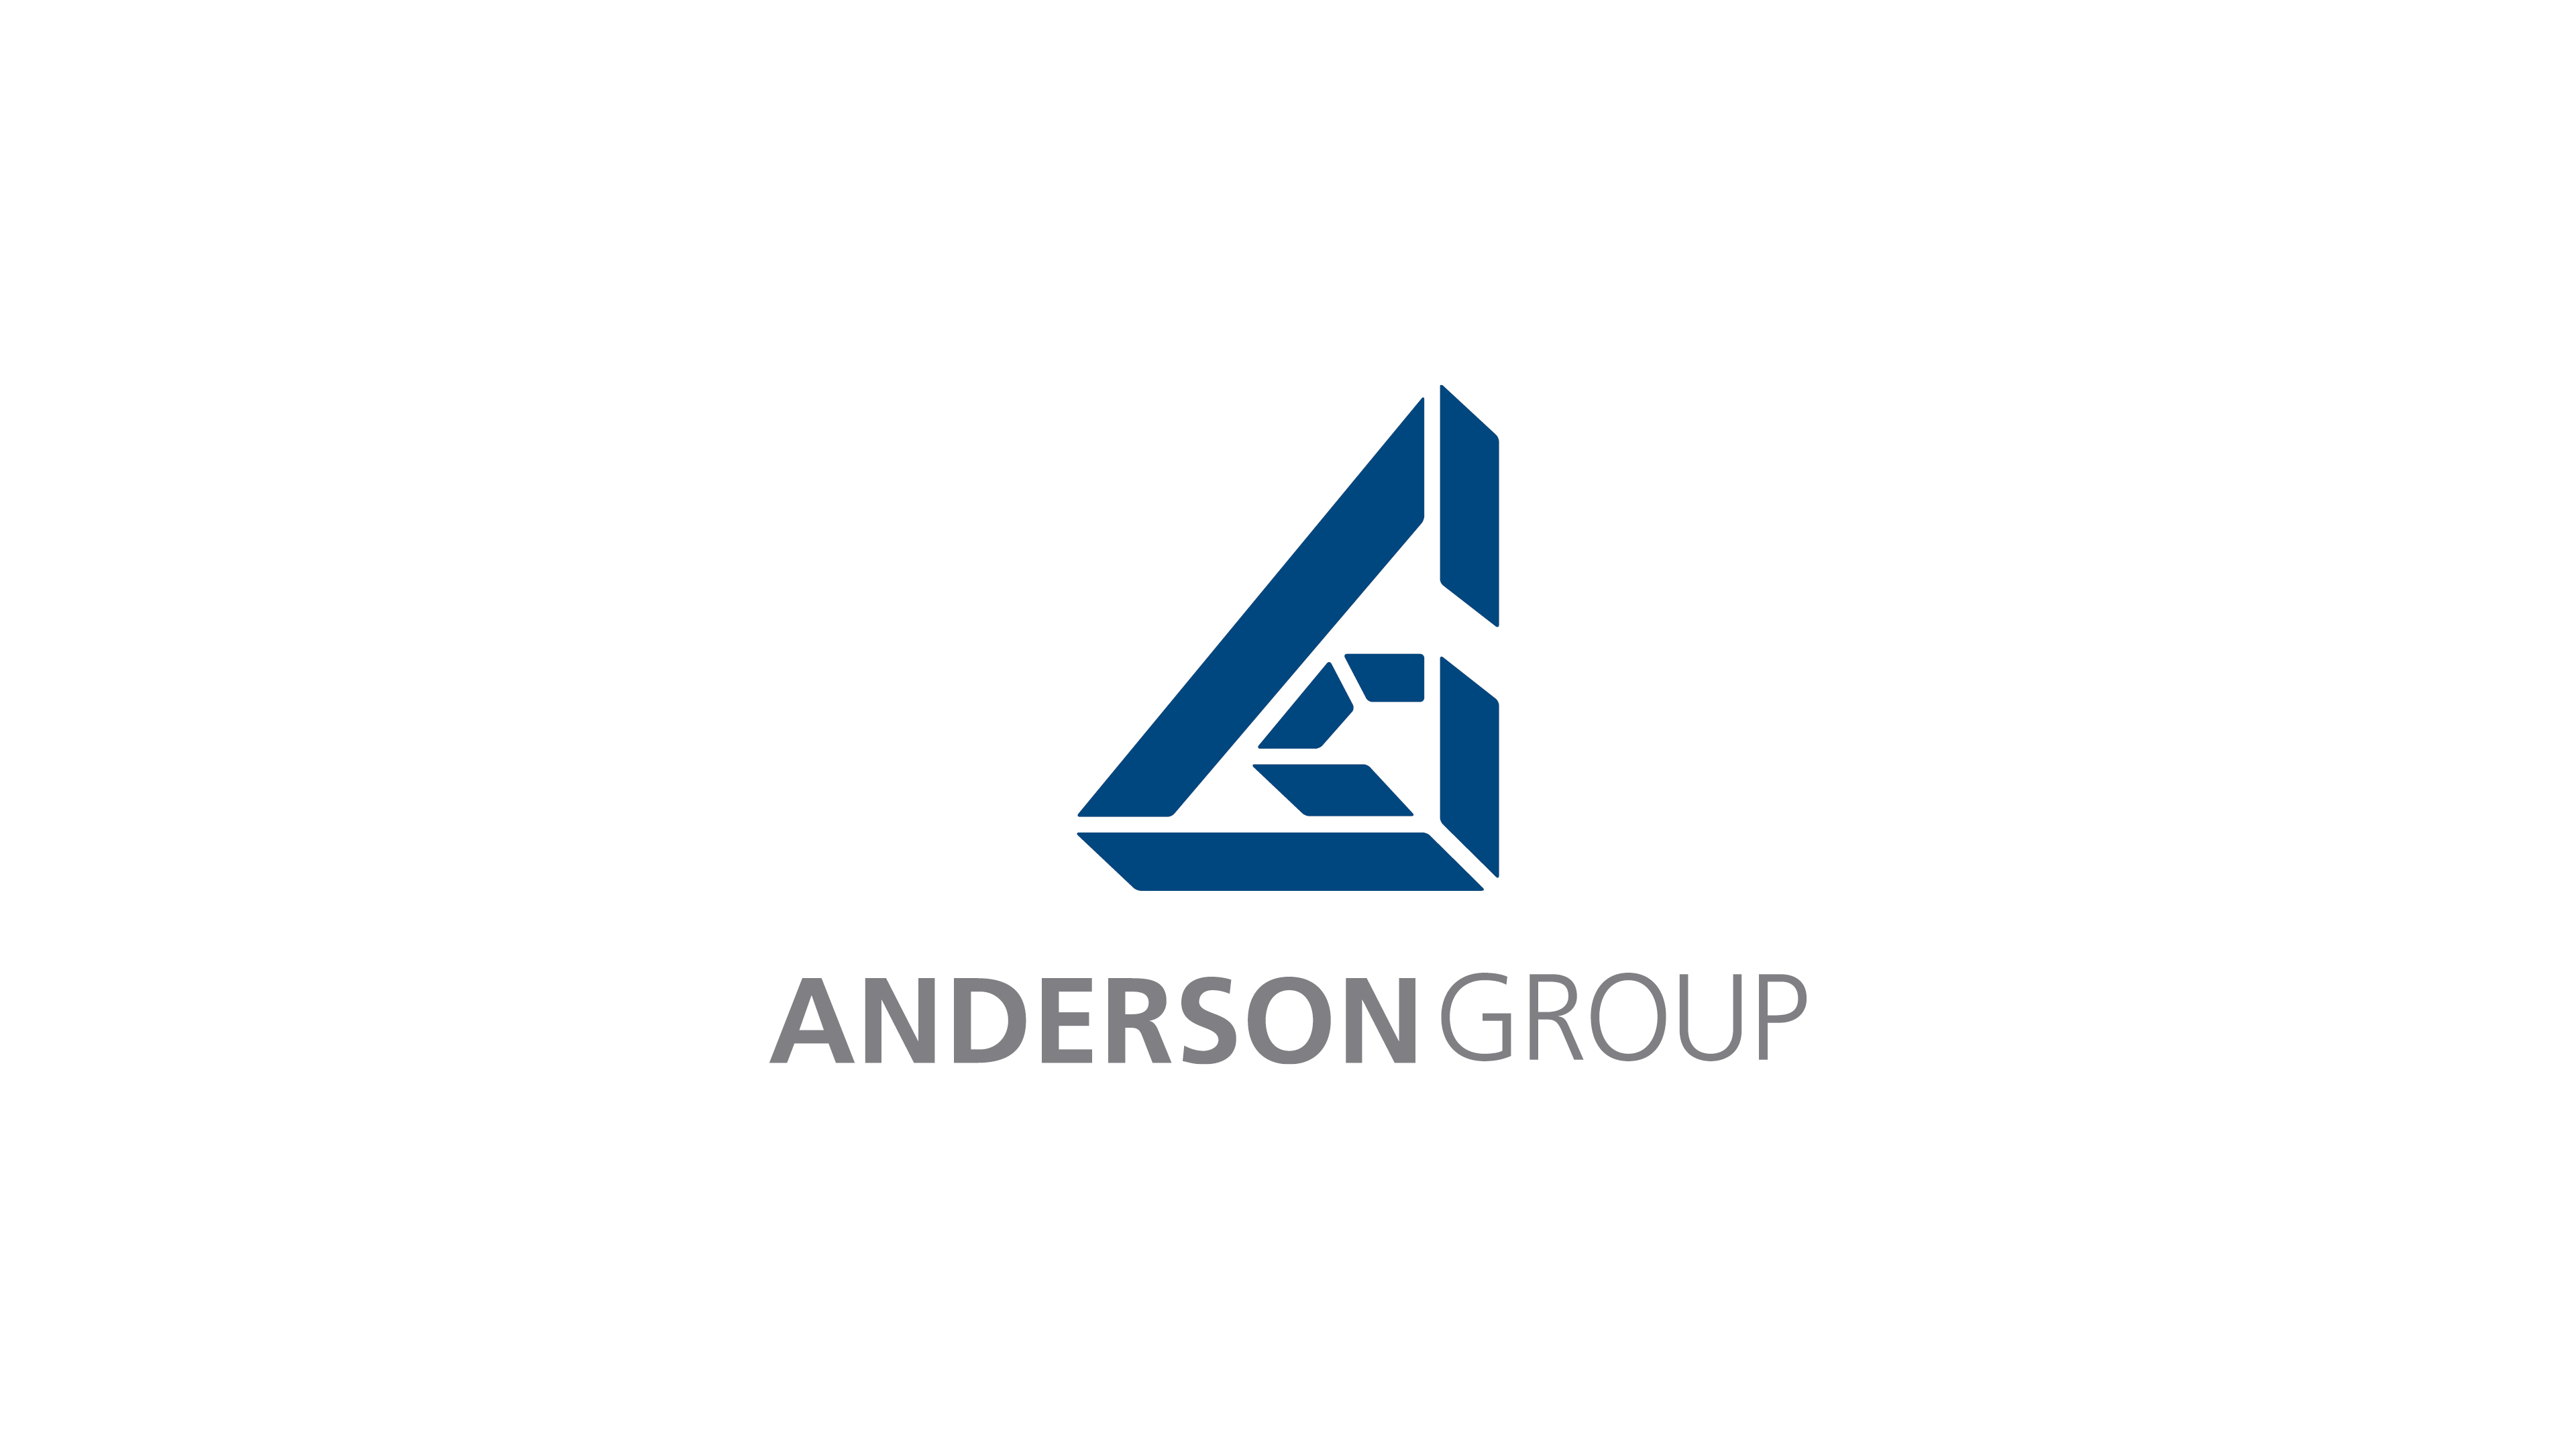 Anderson Group Logo and Brand Design - Saunders Design Group